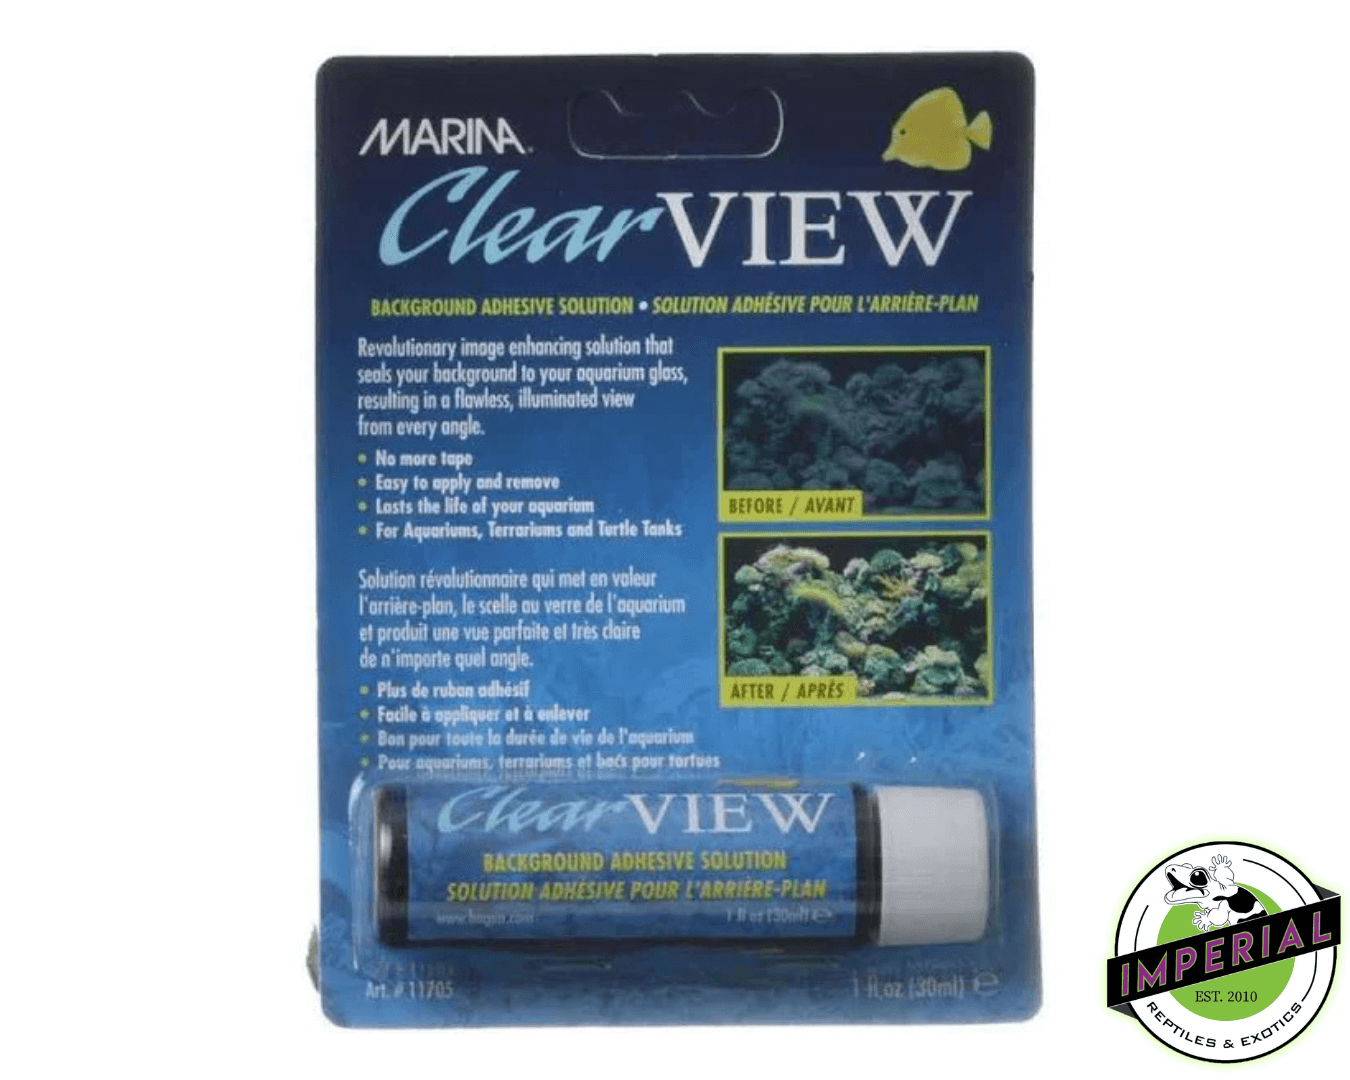 Marina Clear View Background Adhesive